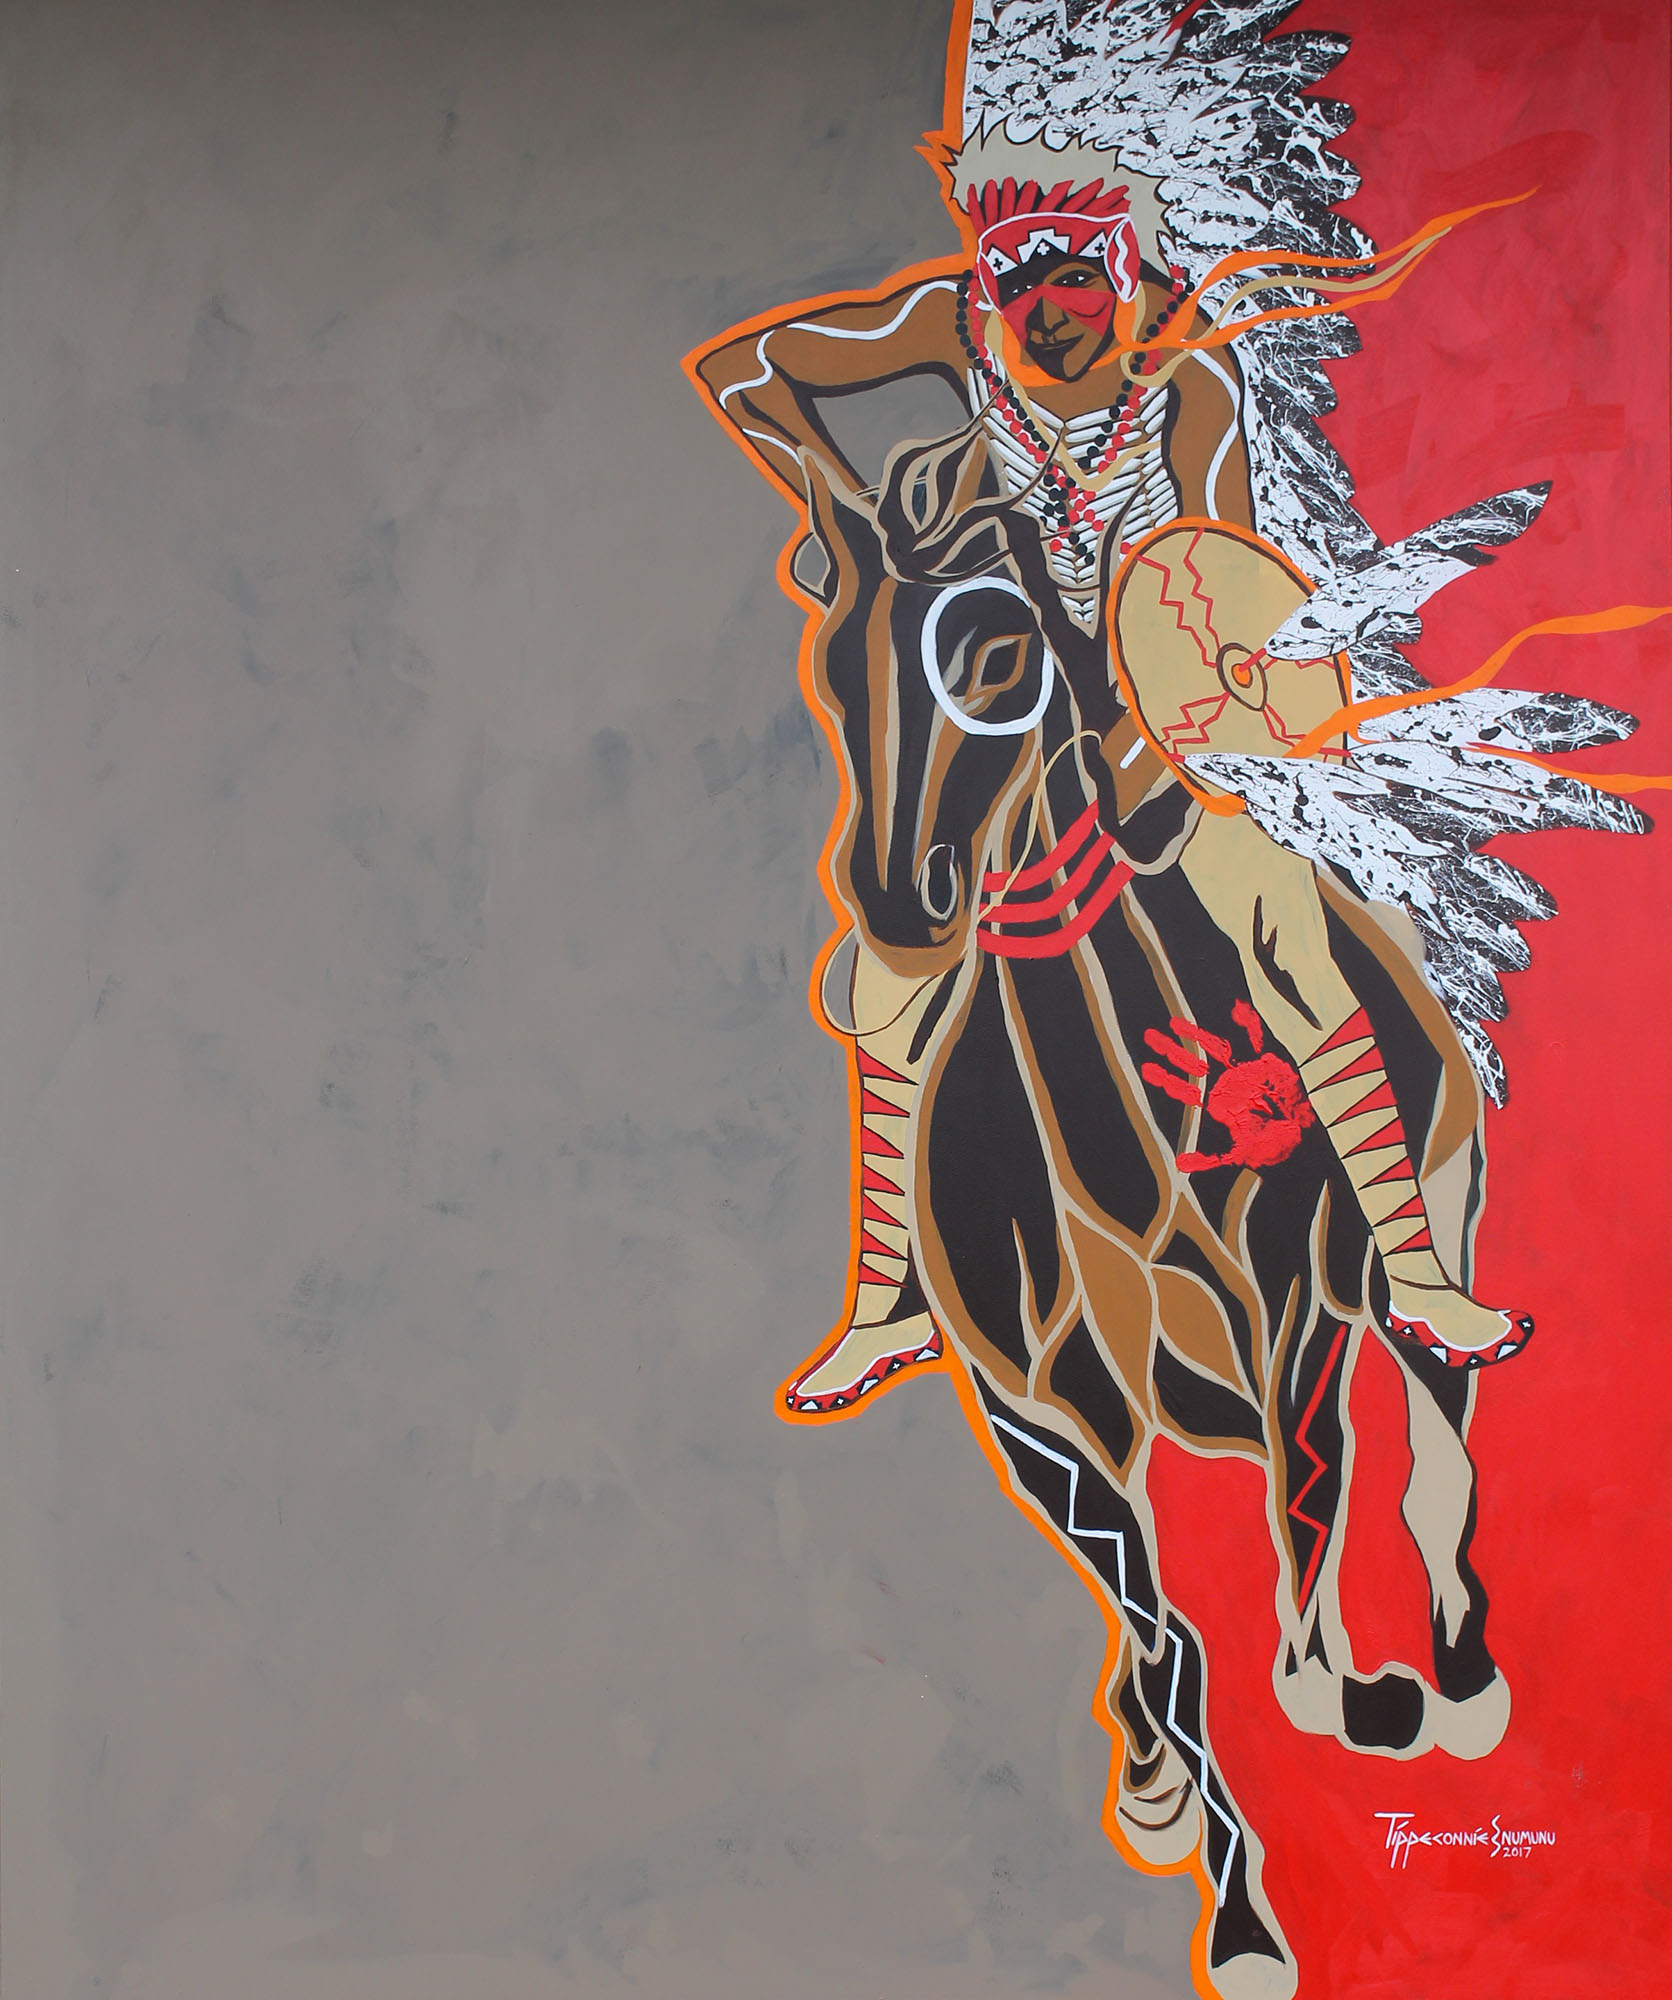 "Comanche Motion" Acrylic on canvas by Eric Tippeconnic, 2017